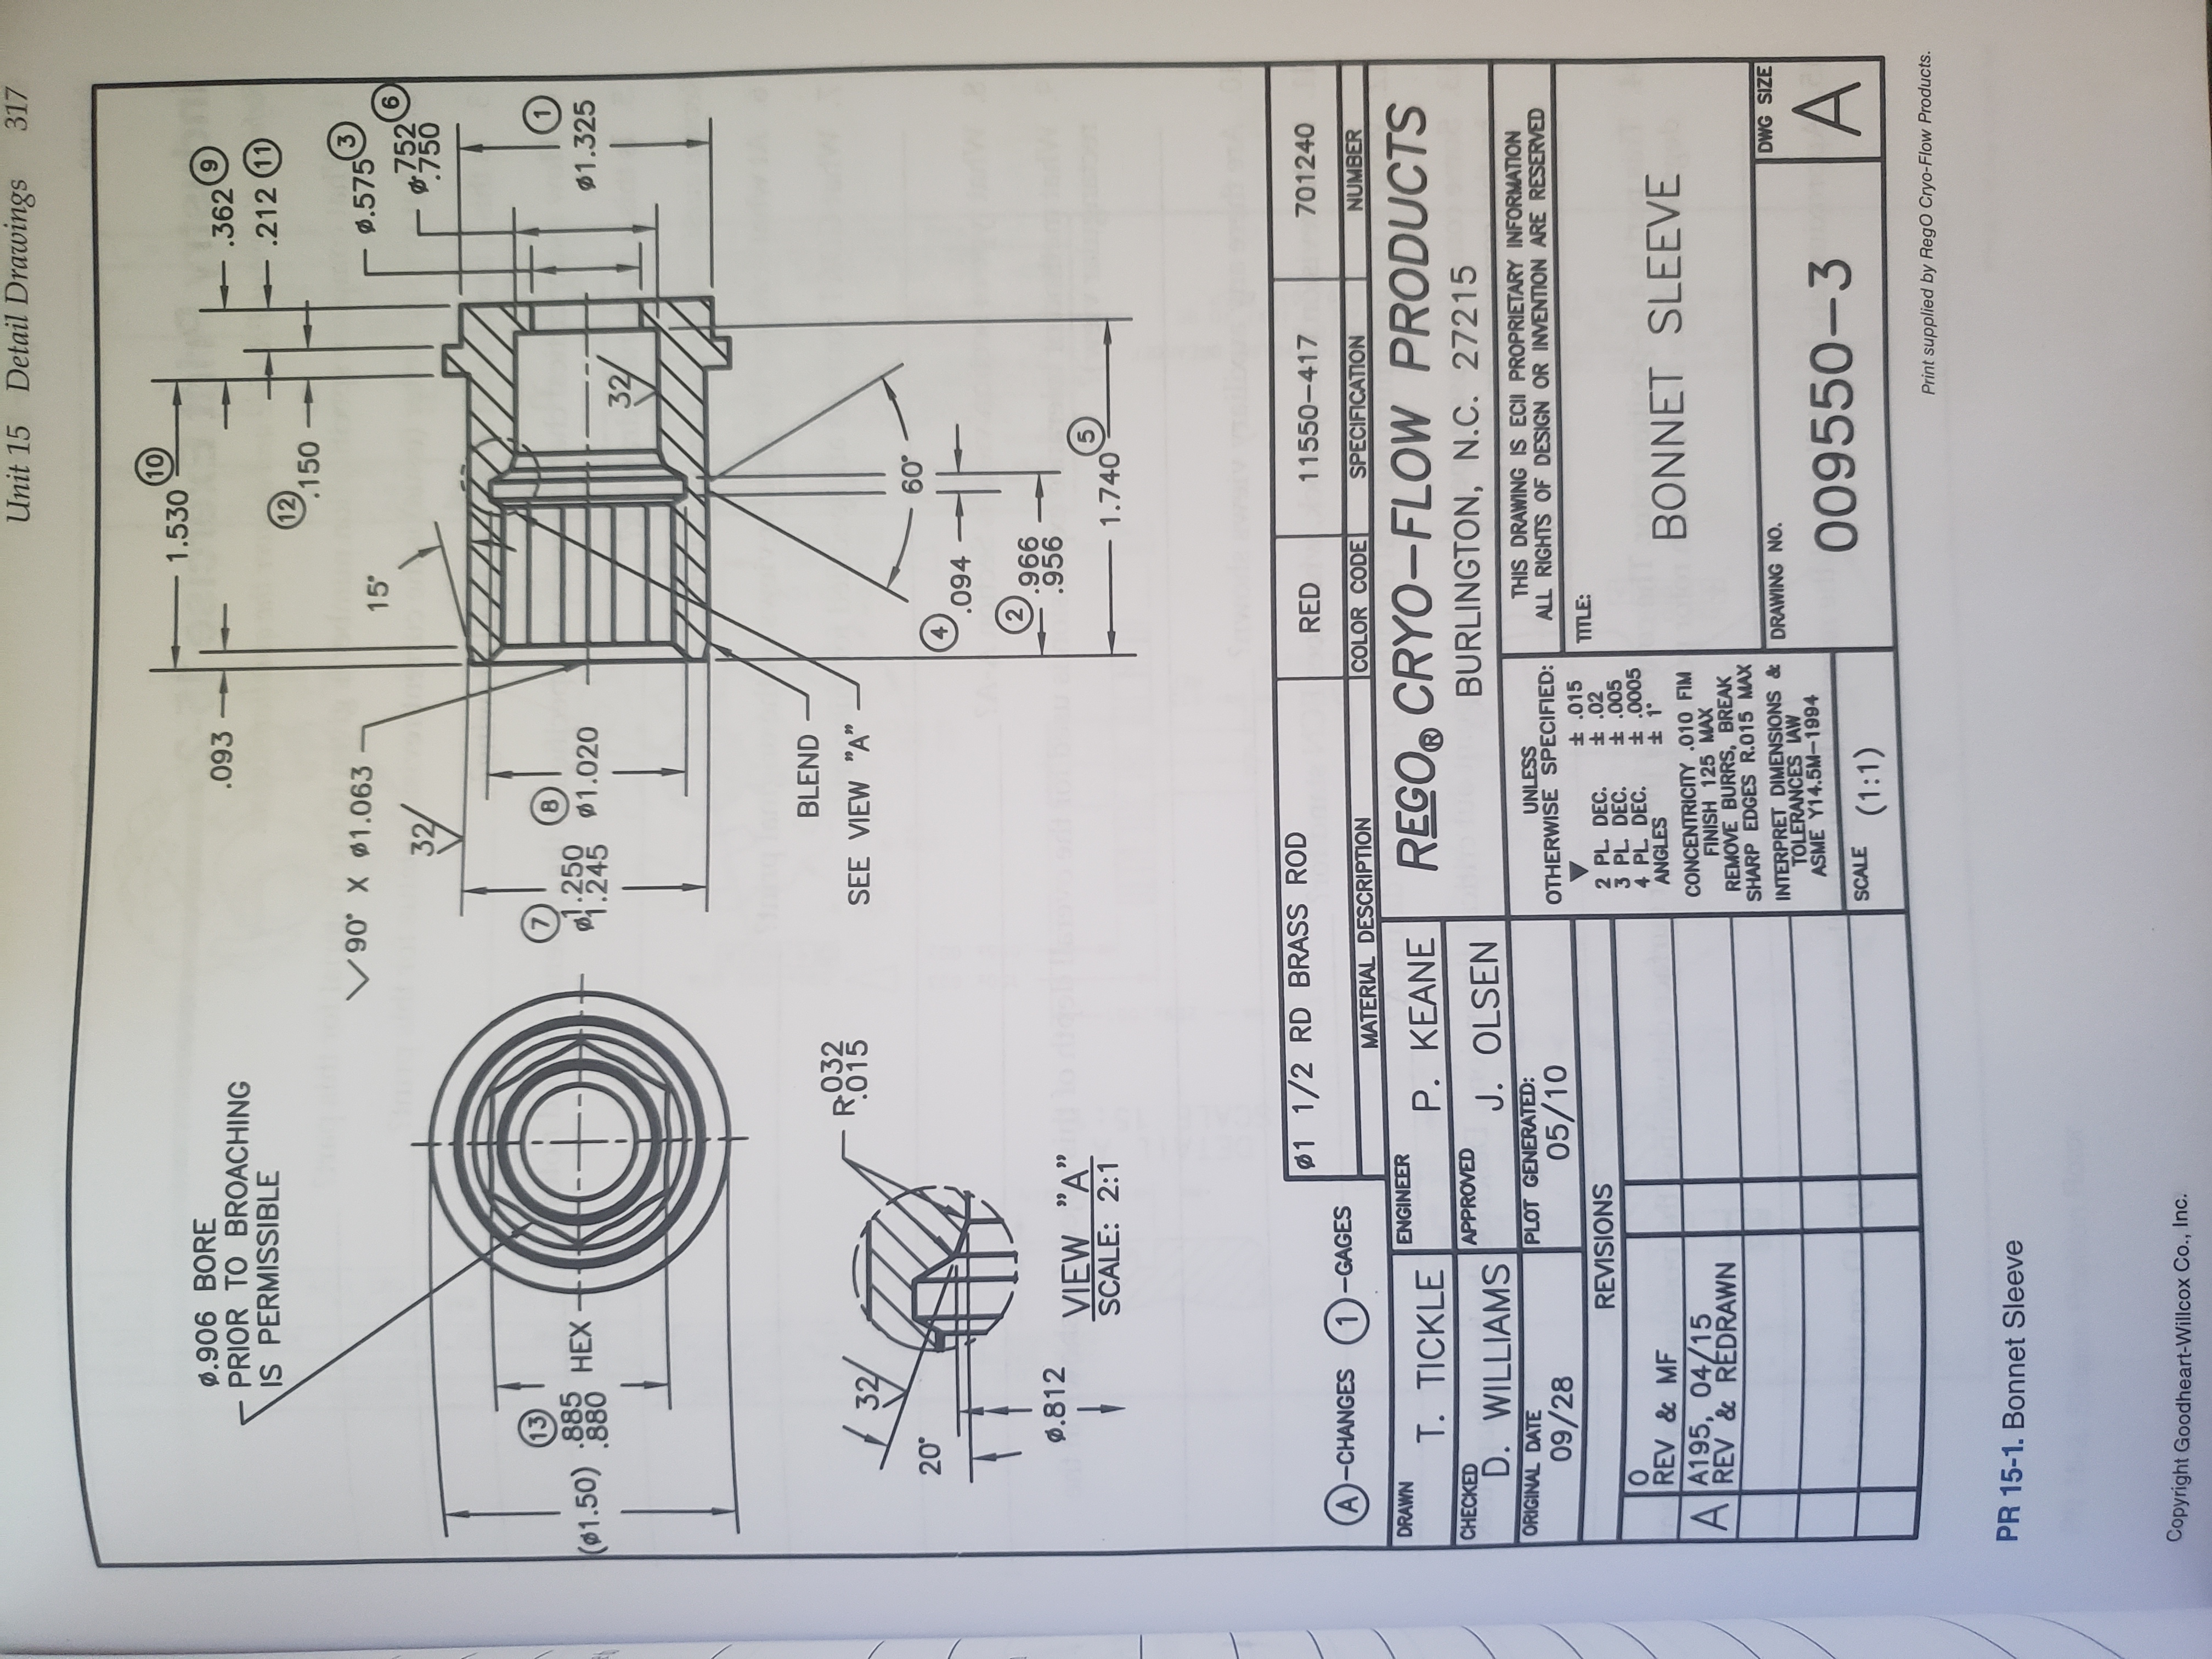 Detail Drawings
Unit 15
317
10
1.530
0.906 BORE
PRIOR TO BROACHING
IS PERMISSIBLE
.093
.362
.212 (11
12
.150
90 X 1.063
3
.575
6
15'
32/
752
.750
13)
7
8
.885
.880
1.250
1.245
НЕХ
(01.50)
1.020
$1.325
32/
BLEND
032
015
SEE VIEW "A"
20°
60°
4
.094
2
.966
.956
.812
dool Tla oooom
VIEW "A"
SCALE: 2:1
99
5
1.740
1 1/2 RD BRASS ROD
RED
11550-417
701240
A-CHANGES
1-GAGES
COLOR CODE
NUMBER
MATERIAL DESCRIPTION
SPECIFICATION
DRAWN
ENGINEER
REGO® CRYO-FLOW PRODUCTS
T. TICKLE
P. KEANE
CHECKED
APPROVED
BURLINGTON, N.C. 27215
D. WILLIAMS
J. OLSEN
ORIGINAL DATE
PLOT GENERATED:
THIS DRAWING IS ECII PROPRIETARY INFORMATION
ALL RIGHTS OF DESIGN OR INVENTION ARE RESERVED
UNLESS
OTHERWISE SPECIFIED:
05/10
09/28
t 015
t 02
t .005
t .0005
t 1°
TITLE:
REVISIONS
2 PL. DEC.
3 PL DEC.
4 PL DEC.
ANGLES
REV & MF
BONNET SLEEVE
A195, 04/15
REV&REDRAWN
A
CONCENTRICITY .010 FIM
FINISH 125 MAX
REMOVE BURRS, BREAK
SHARP EDGES R.015 MAX
INTERPRET DIMENSIONS &
TOLERANCES AW
ASME Y14.5M-1994
DWG SIZE
DRAWING NO
A
009550-3
SCALE
(1:1)
Print supplied by RegO Cryo-Flow Products.
PR 15-1. Bonnet Sleeve
Copyright Goodheart-Willcox Co., Inc.
